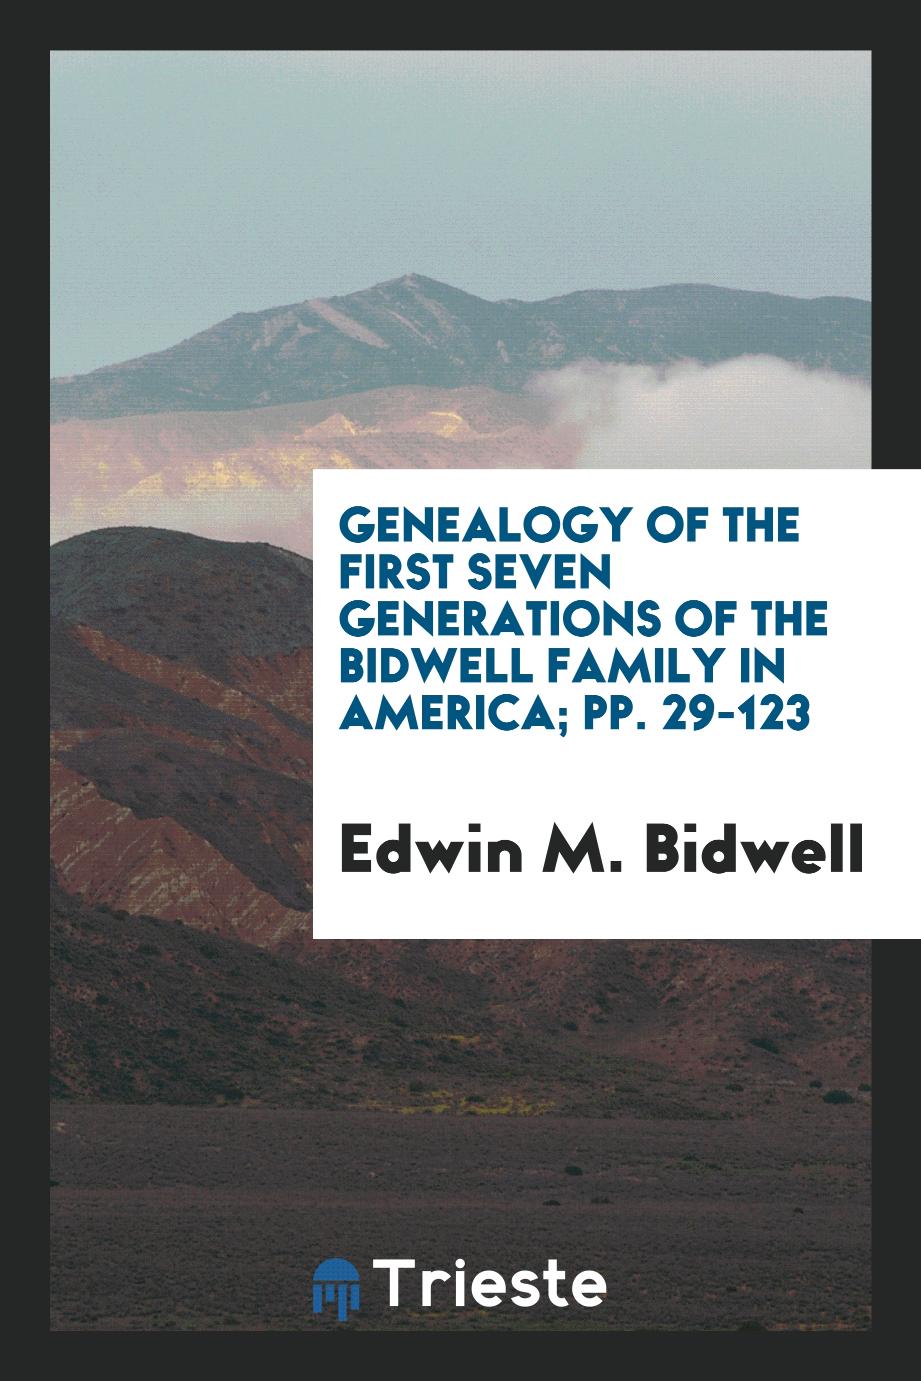 Genealogy of the First Seven Generations of the Bidwell Family in America; pp. 29-123